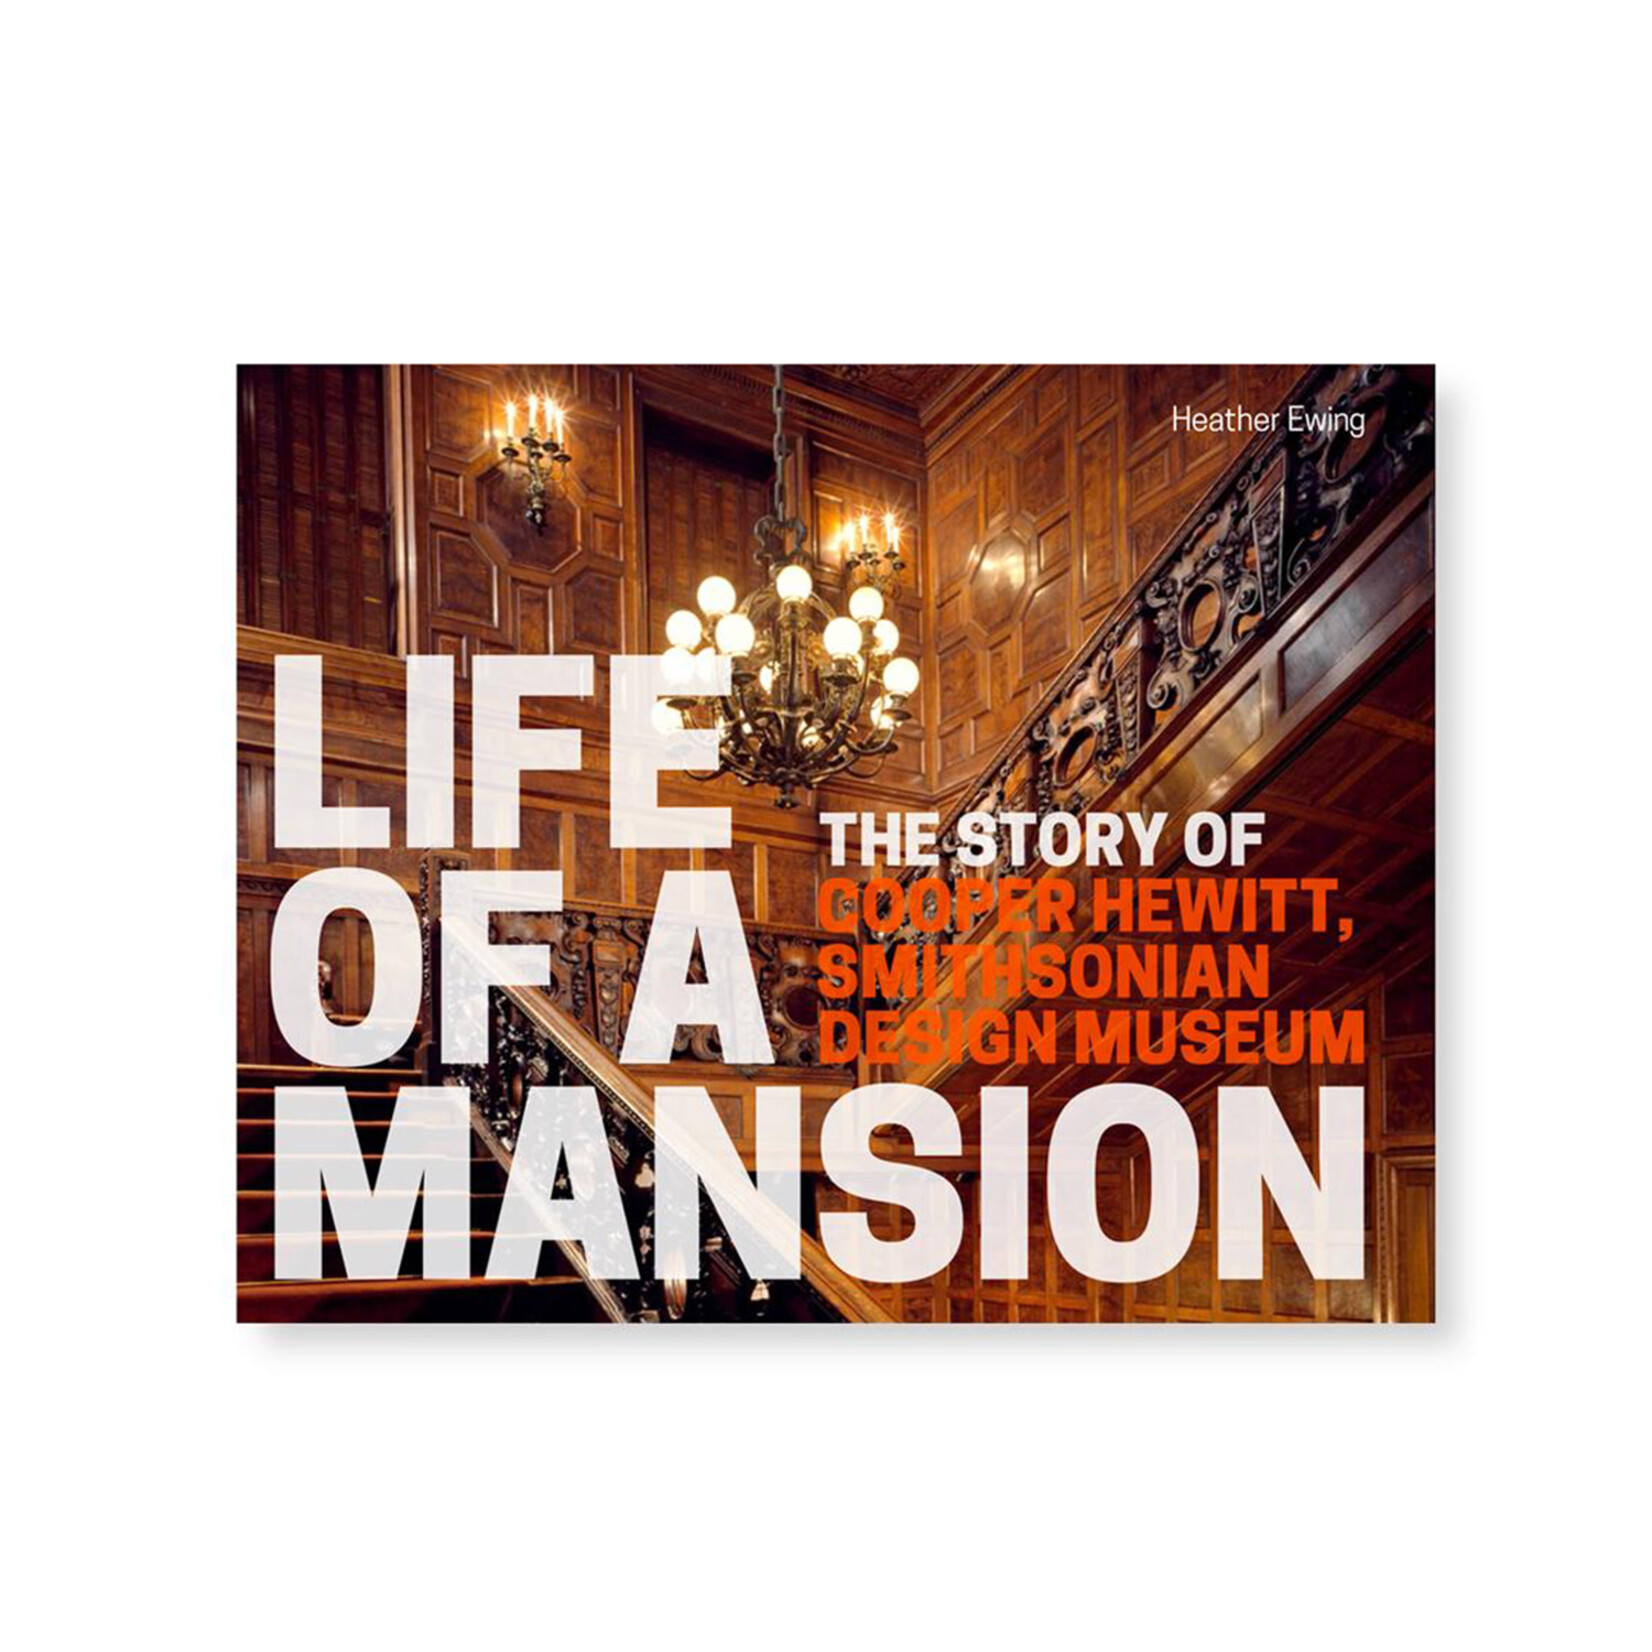 Life of A Mansion: The Story of the Cooper Hewitt, Smithsonian Design Museum